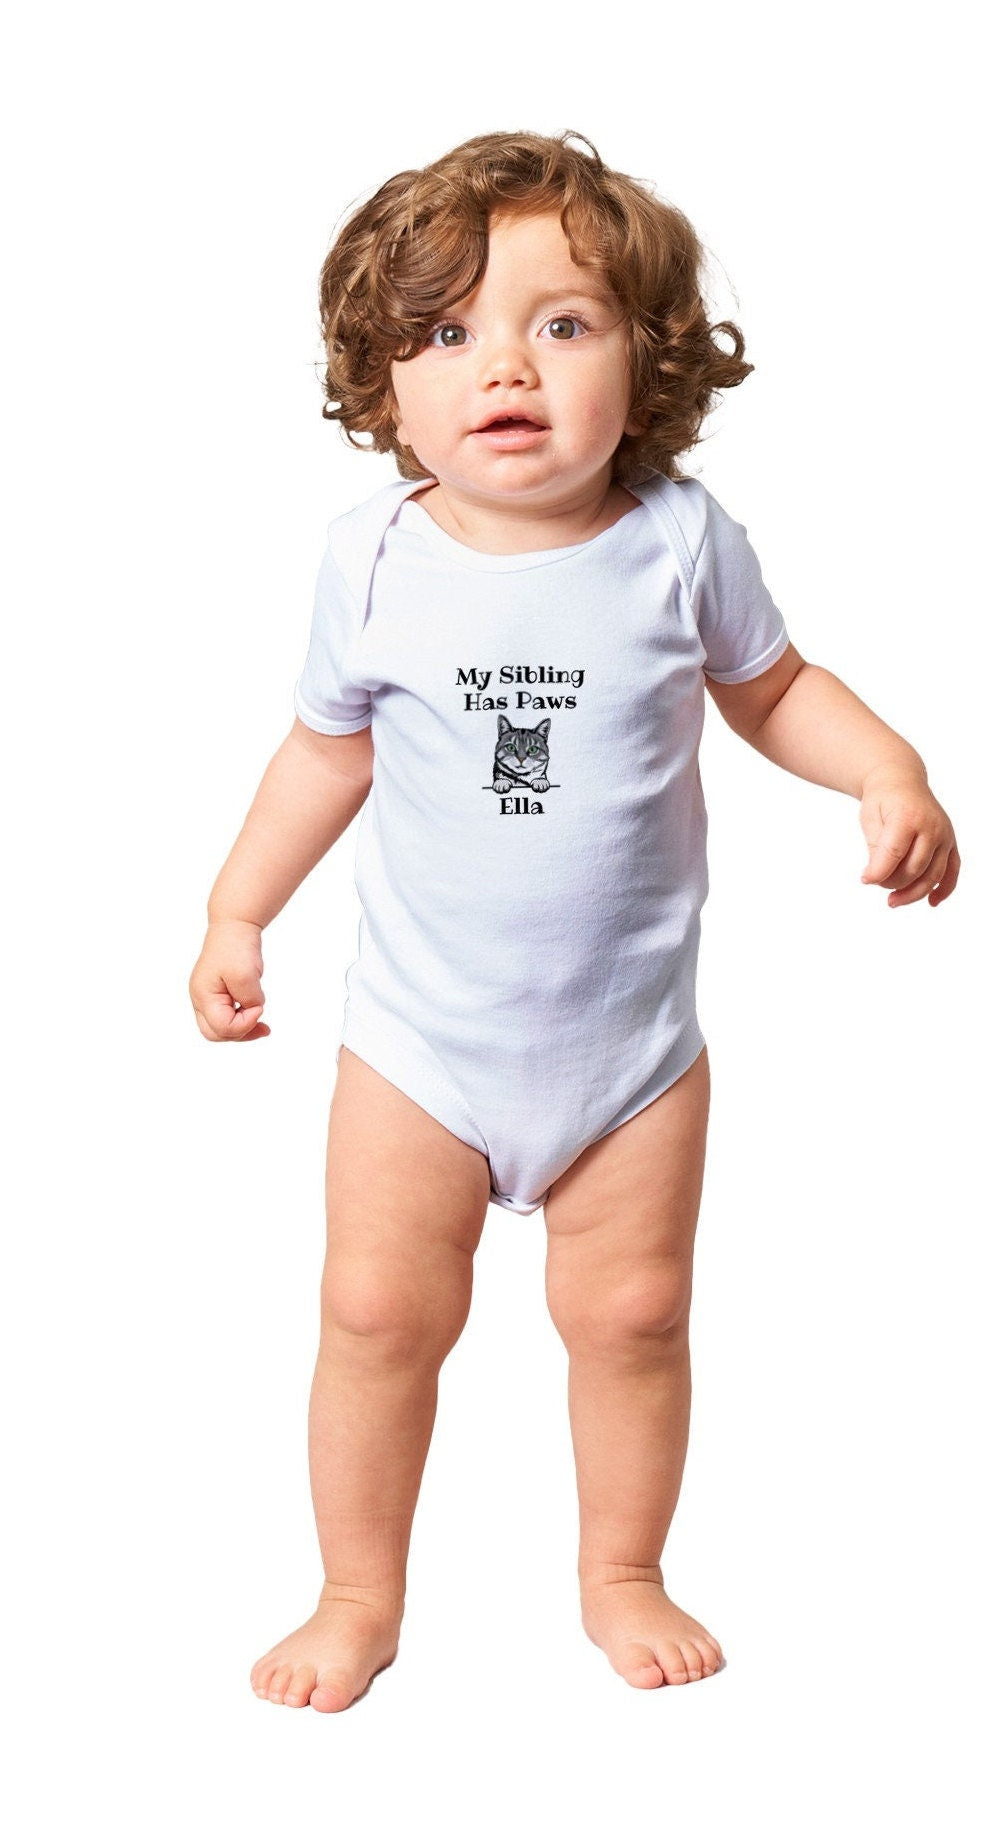 Personalized My Sibling Has Paws Cat Breed Baby Bodysuit, Custom Cat Bodysuit, Cat Mom Gift